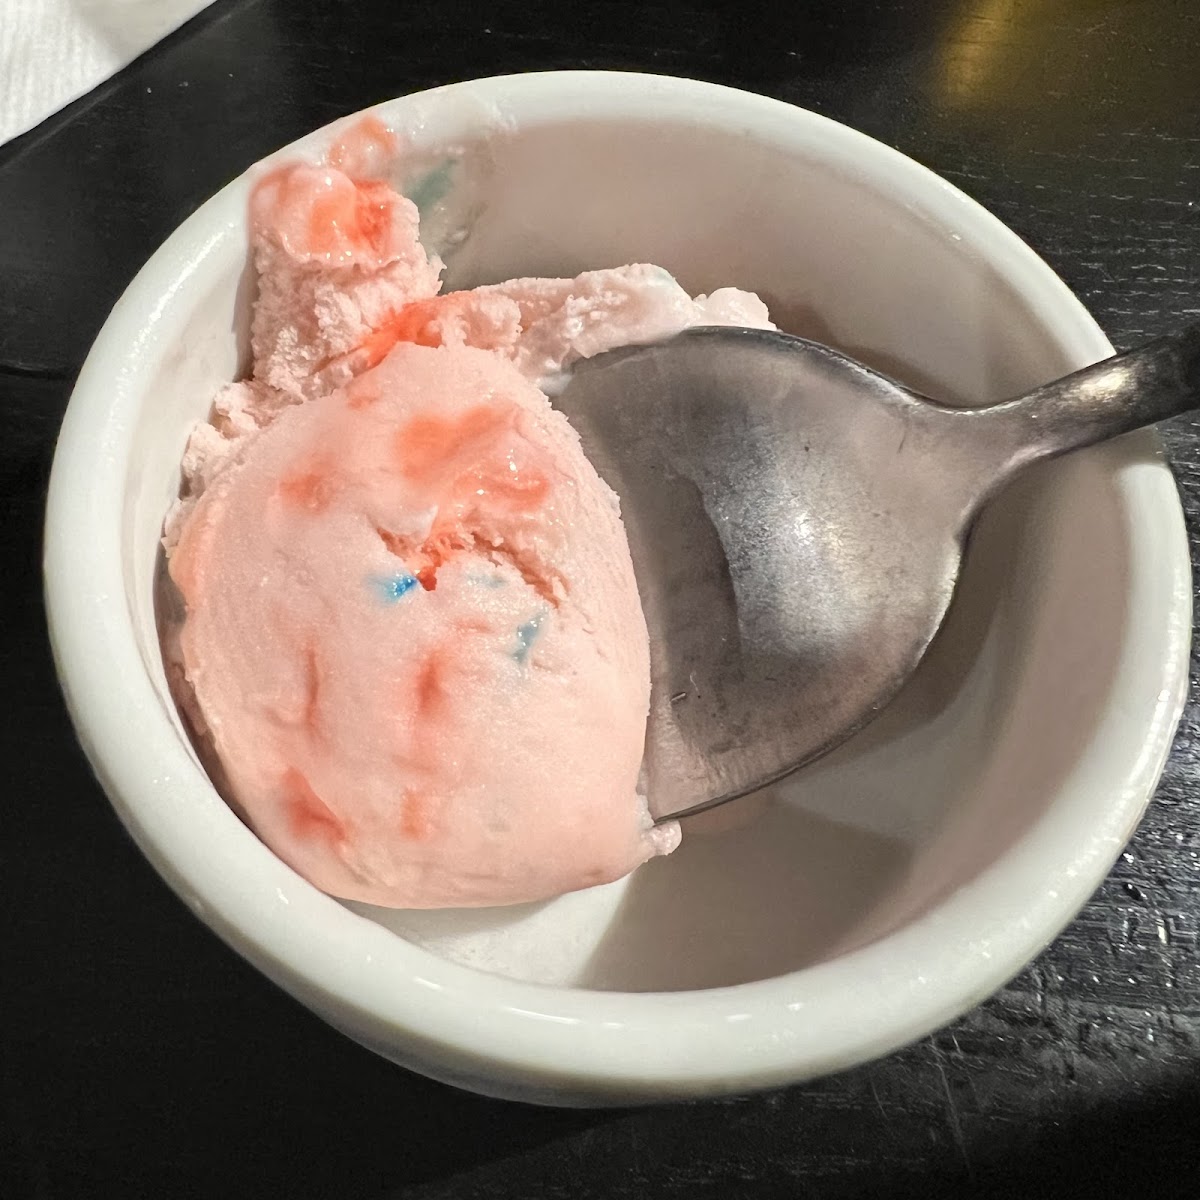 Complementary scoop of peppermint ice cream